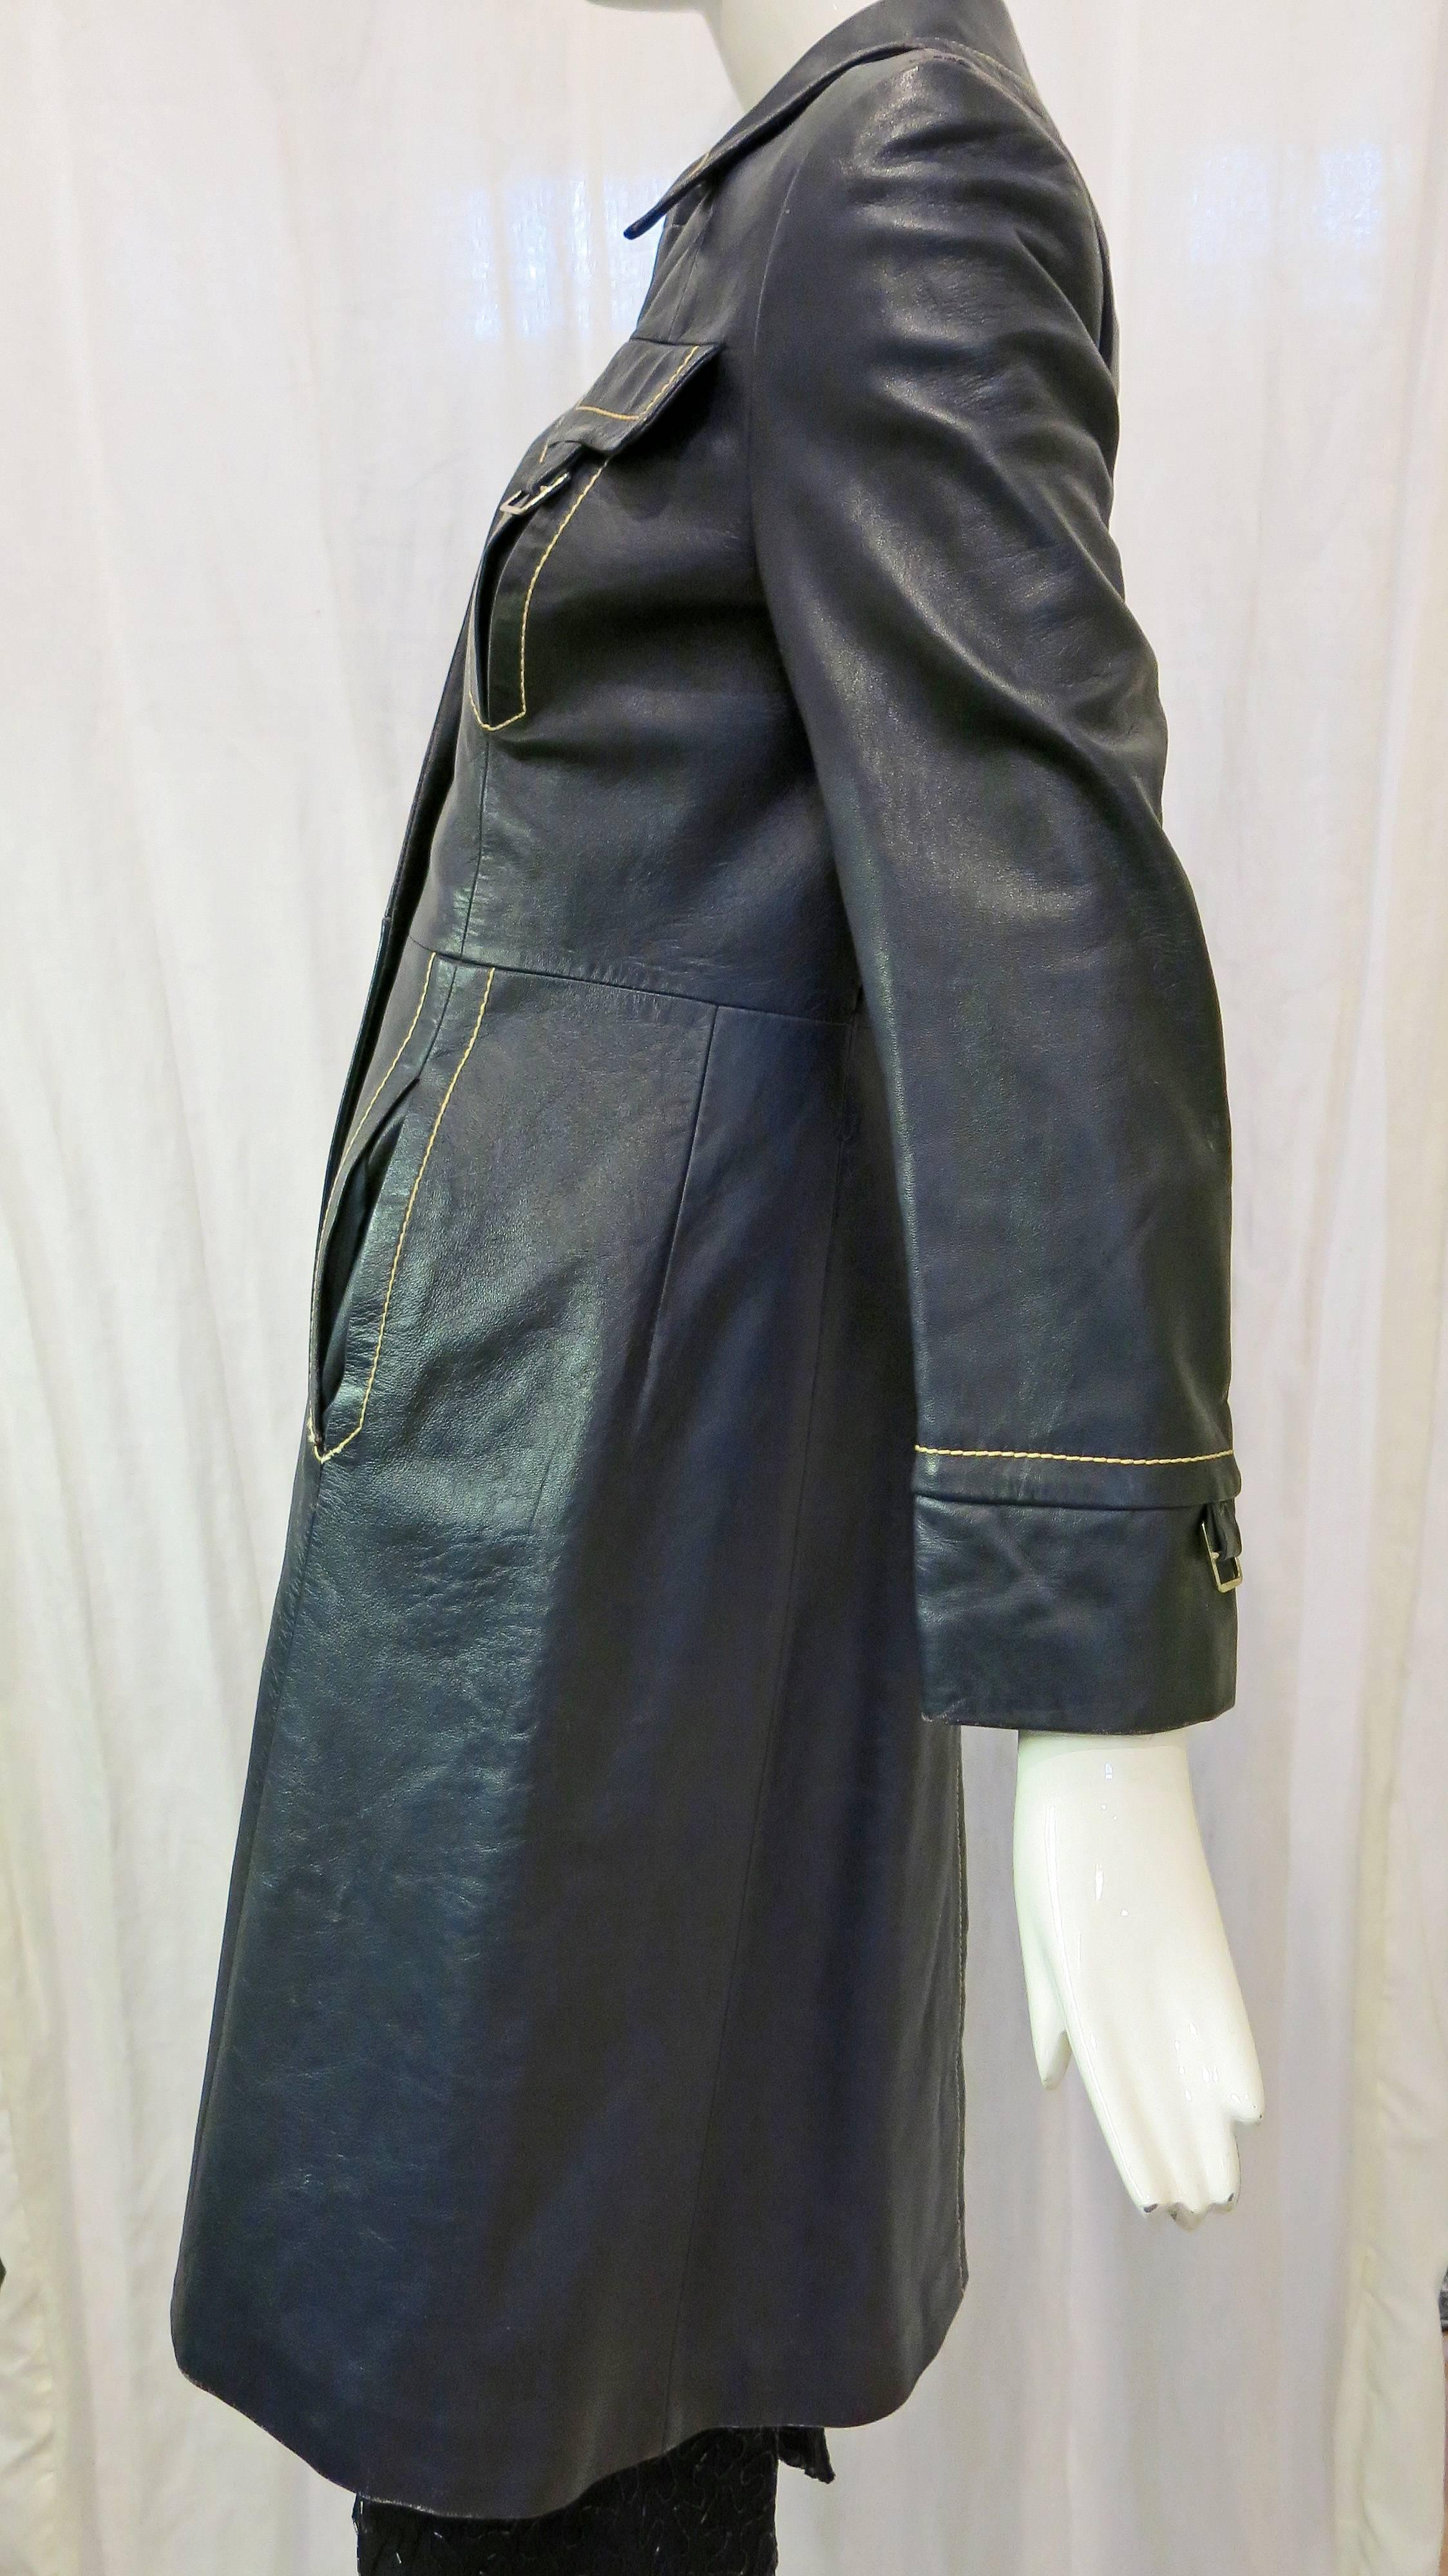 Navy blue leather trench with white contrast stitching. Missing belt. Five metal buttons down the front. Some light wear to the leather throughout. Inner lining in great condition. 14.5